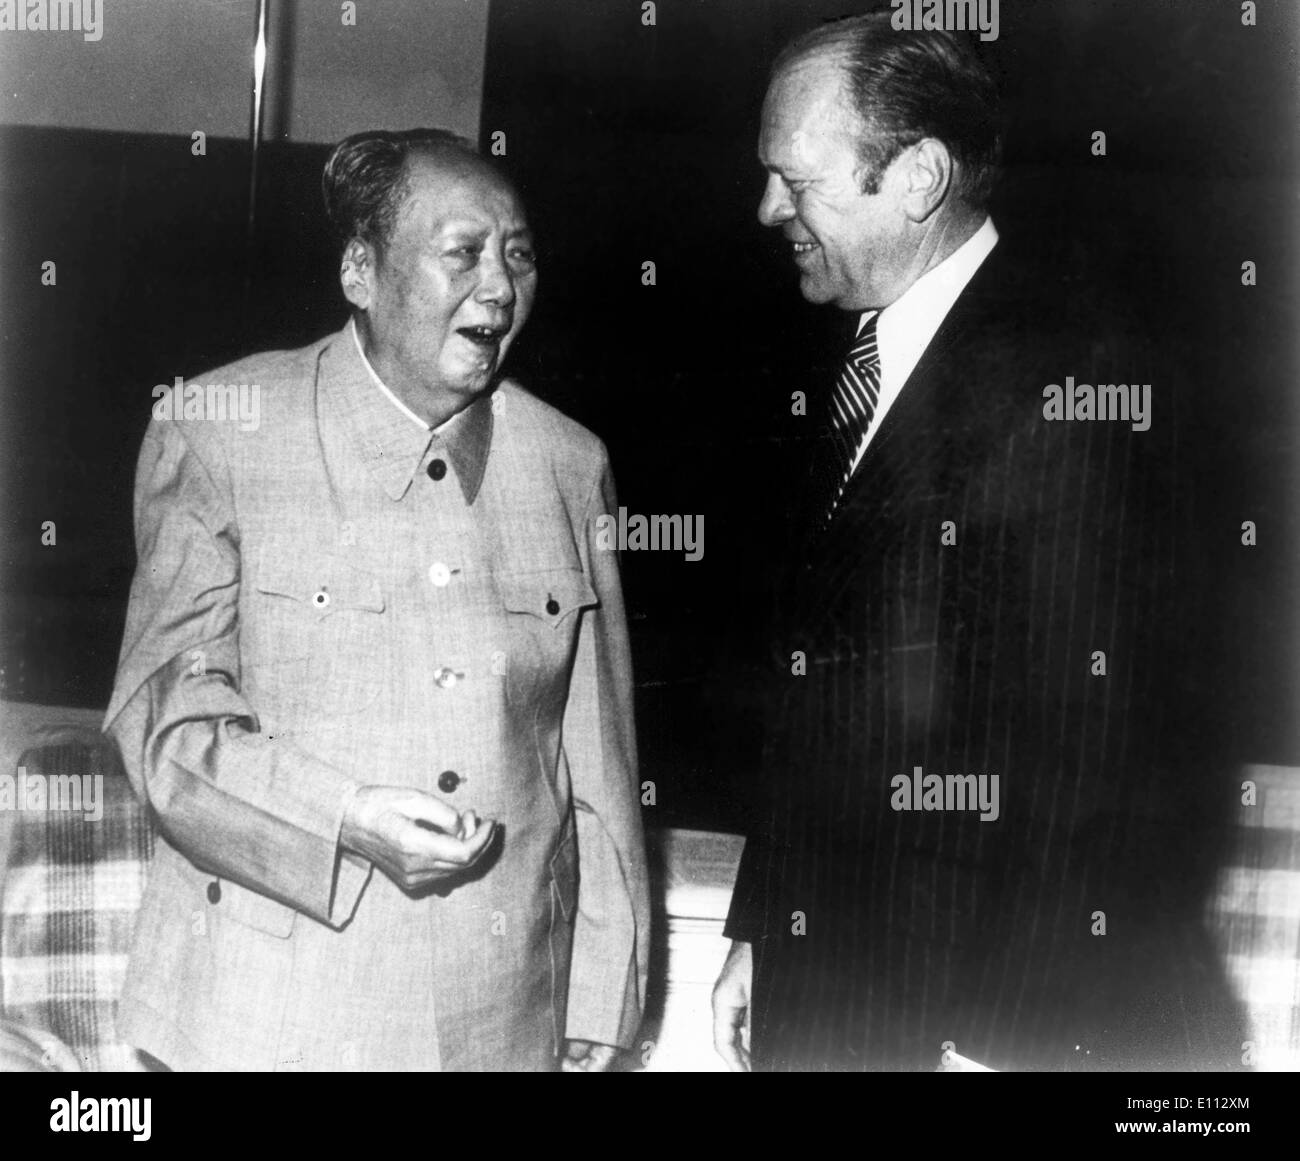 June 12, 1975 - Peking, China - During his official visit to Popular China, the American President GERALD FORD met the main Chinese leaders like the President MAO ZEDONG. PICTURED: Both leaders having a pleasant conversation. Stock Photo